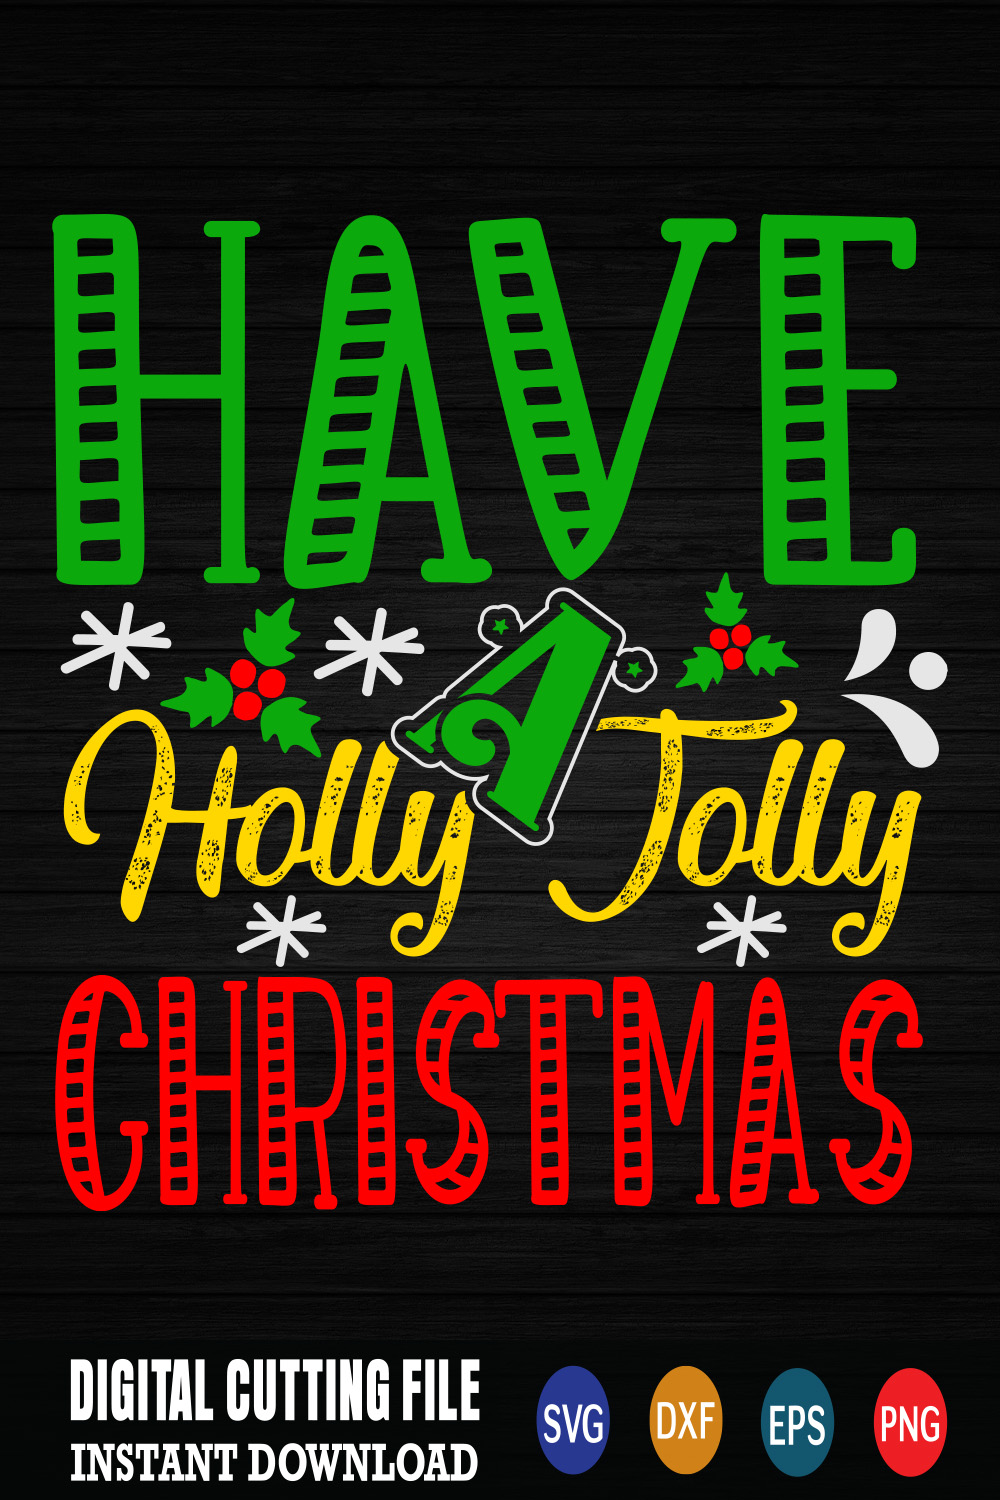 Image for prints with a charming inscription Have A Holly Jolly Christmas.